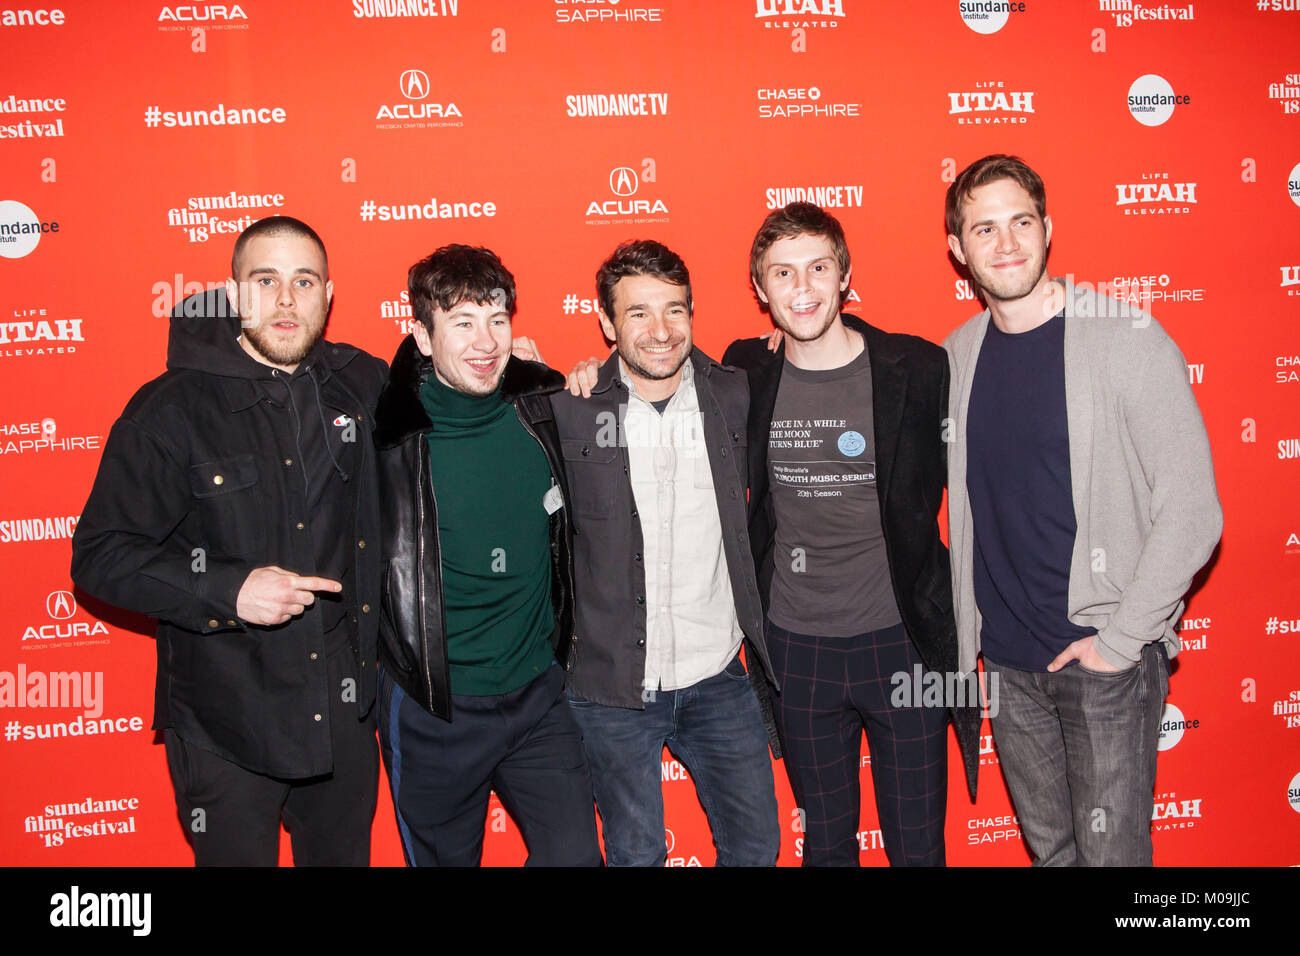 (L-R) Actors Jared Abrahamson, Barry Keoghan, Evan Peters and Blake Jenner with Director Bart Layton (C) attend the 'American Animals' Premiere during the 2018 Sundance Film Festival at Eccles Center Theatre on January 19, 2018 in Park City, Utah. Stock Photo